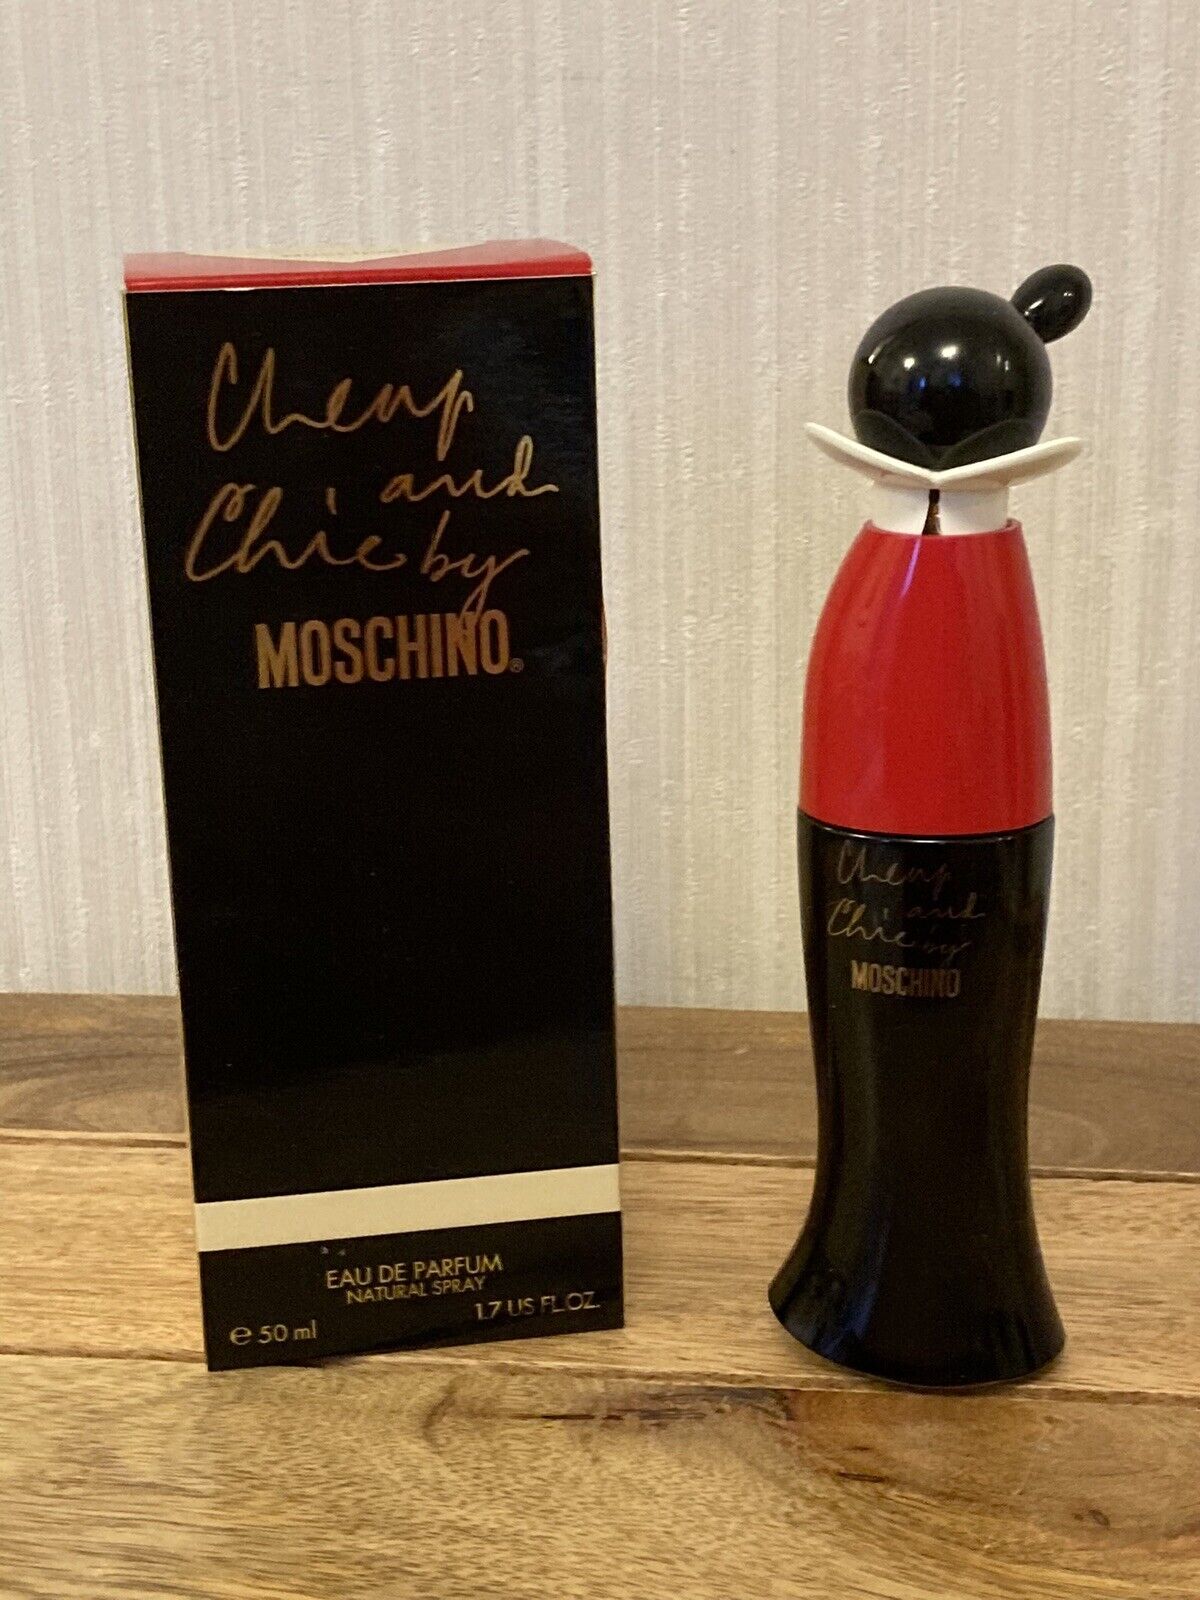 Cheap and Chic by Moschino Eau De Perfume EMPTY bottle 50ml with box collectable